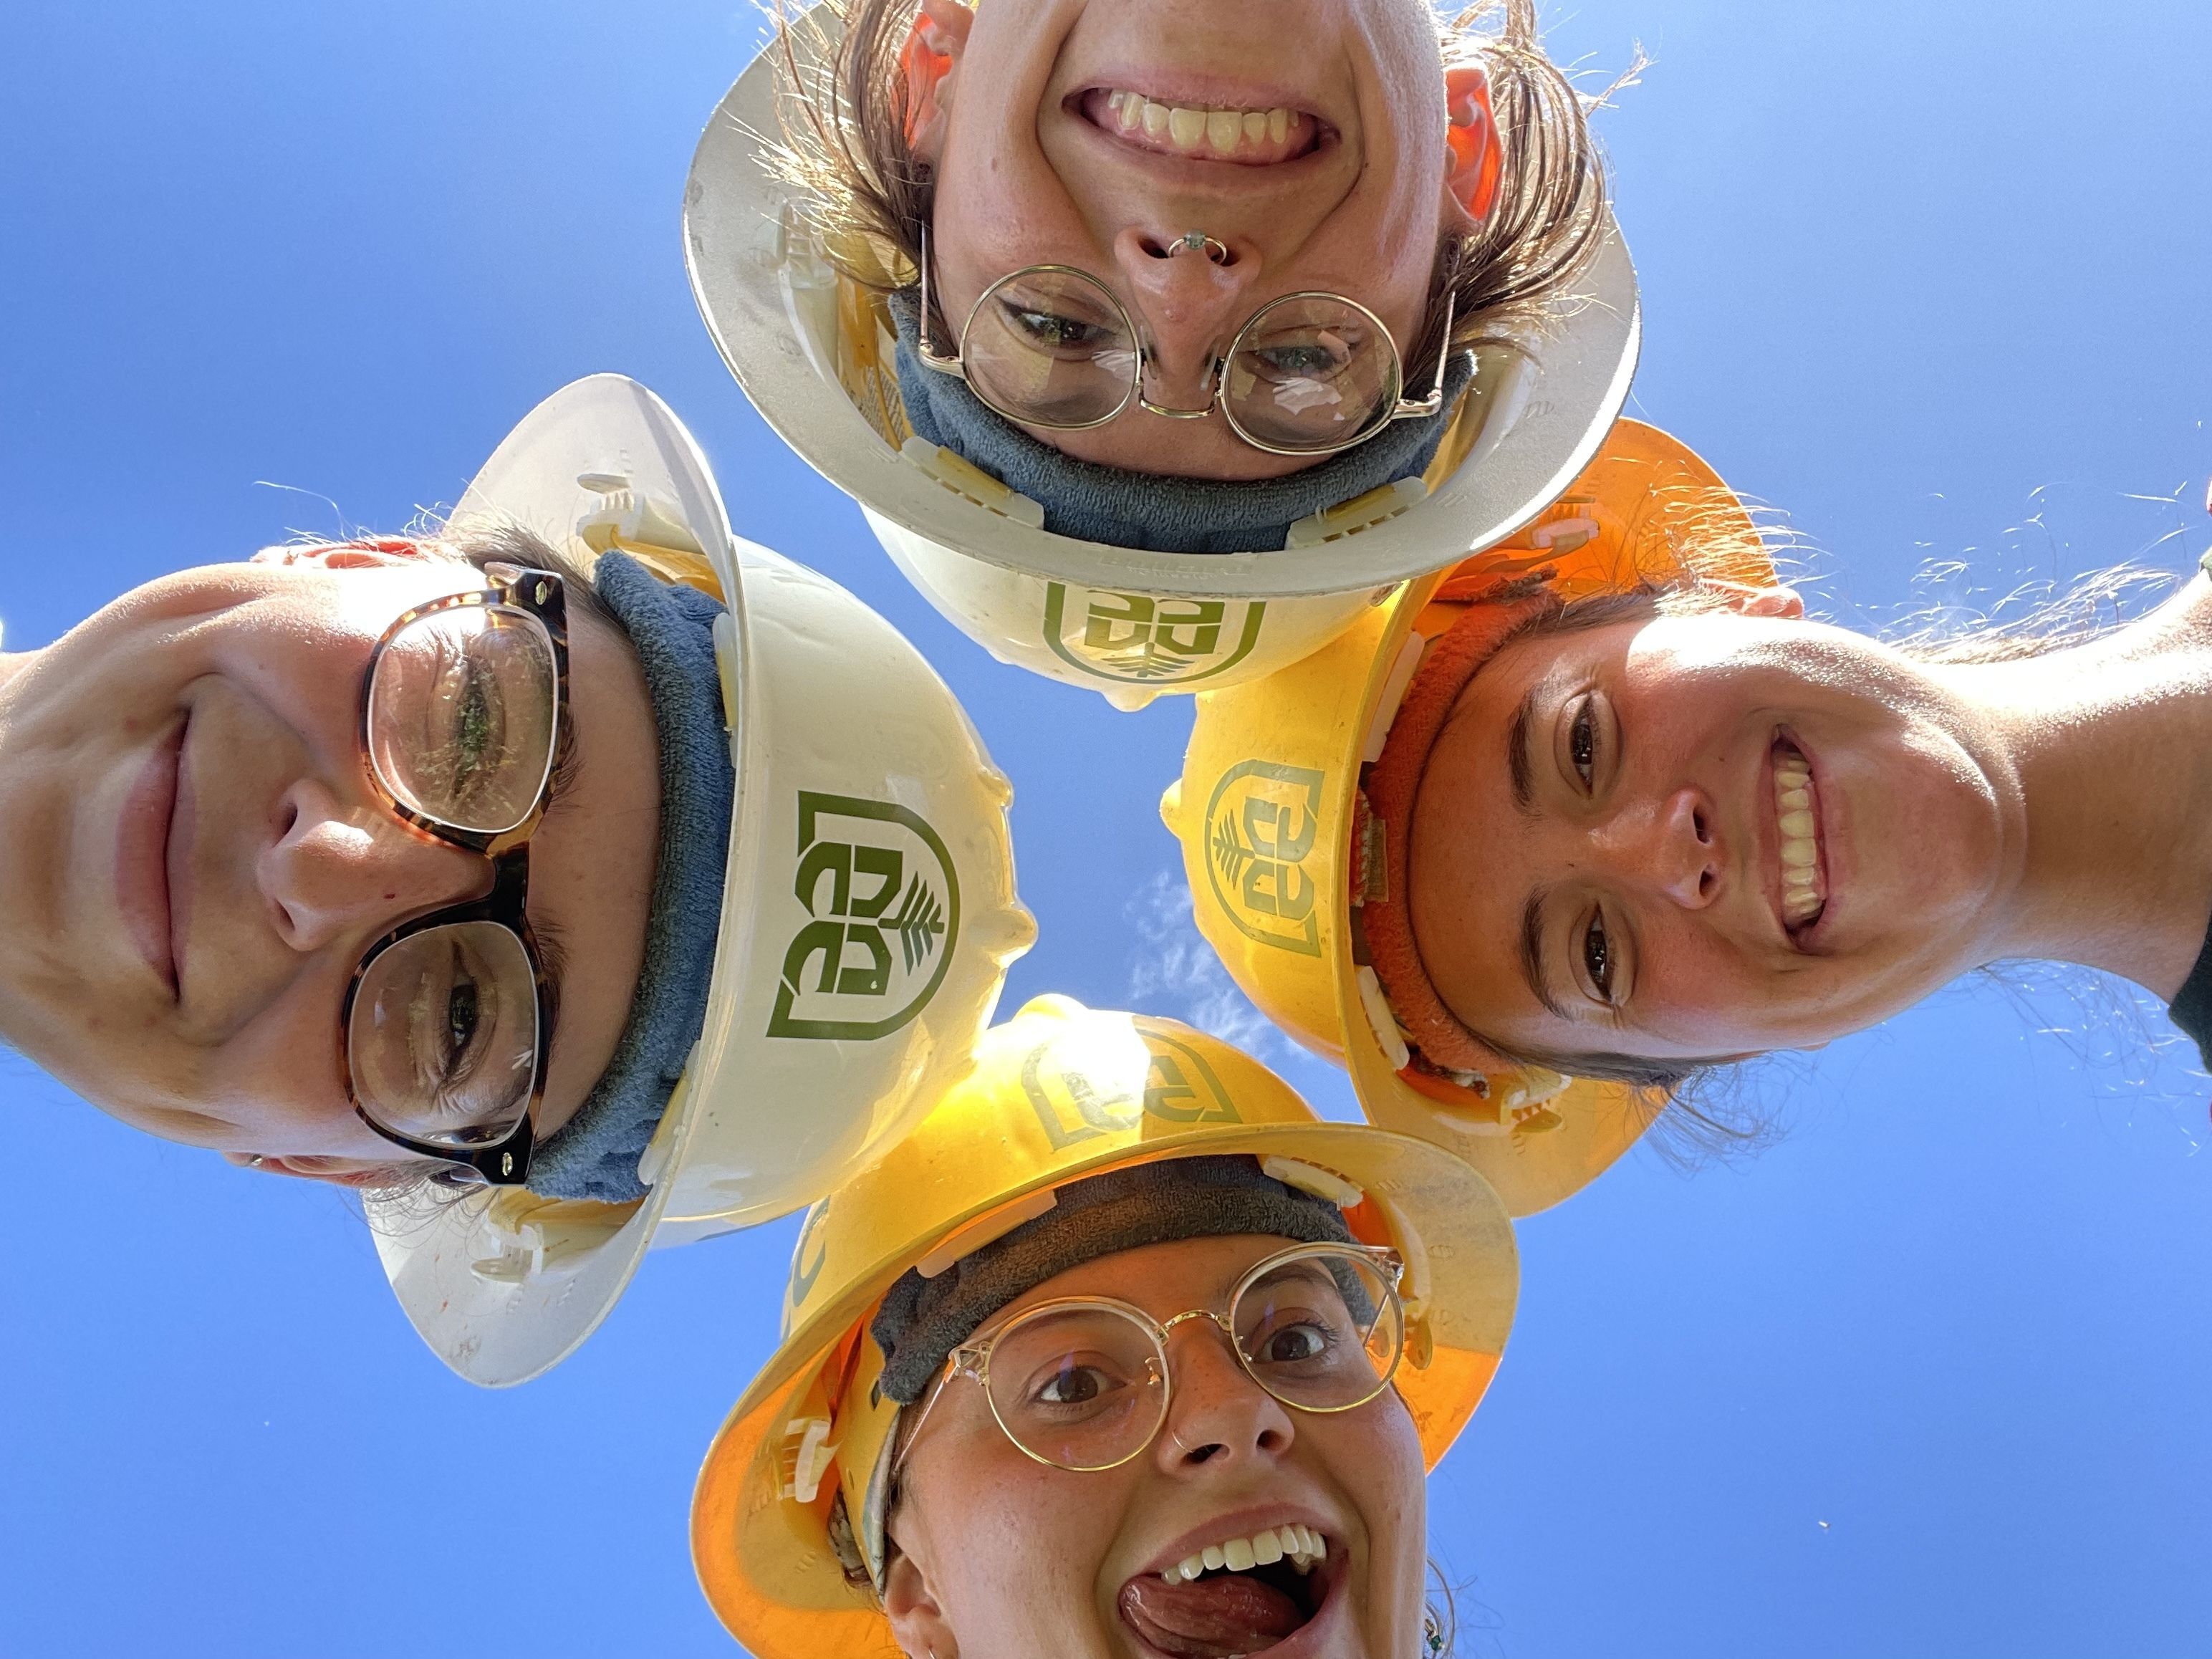 Four crew members wearing hard hats cluster in a circle above the camera, and against a blue sky. They are smiling and laughing.